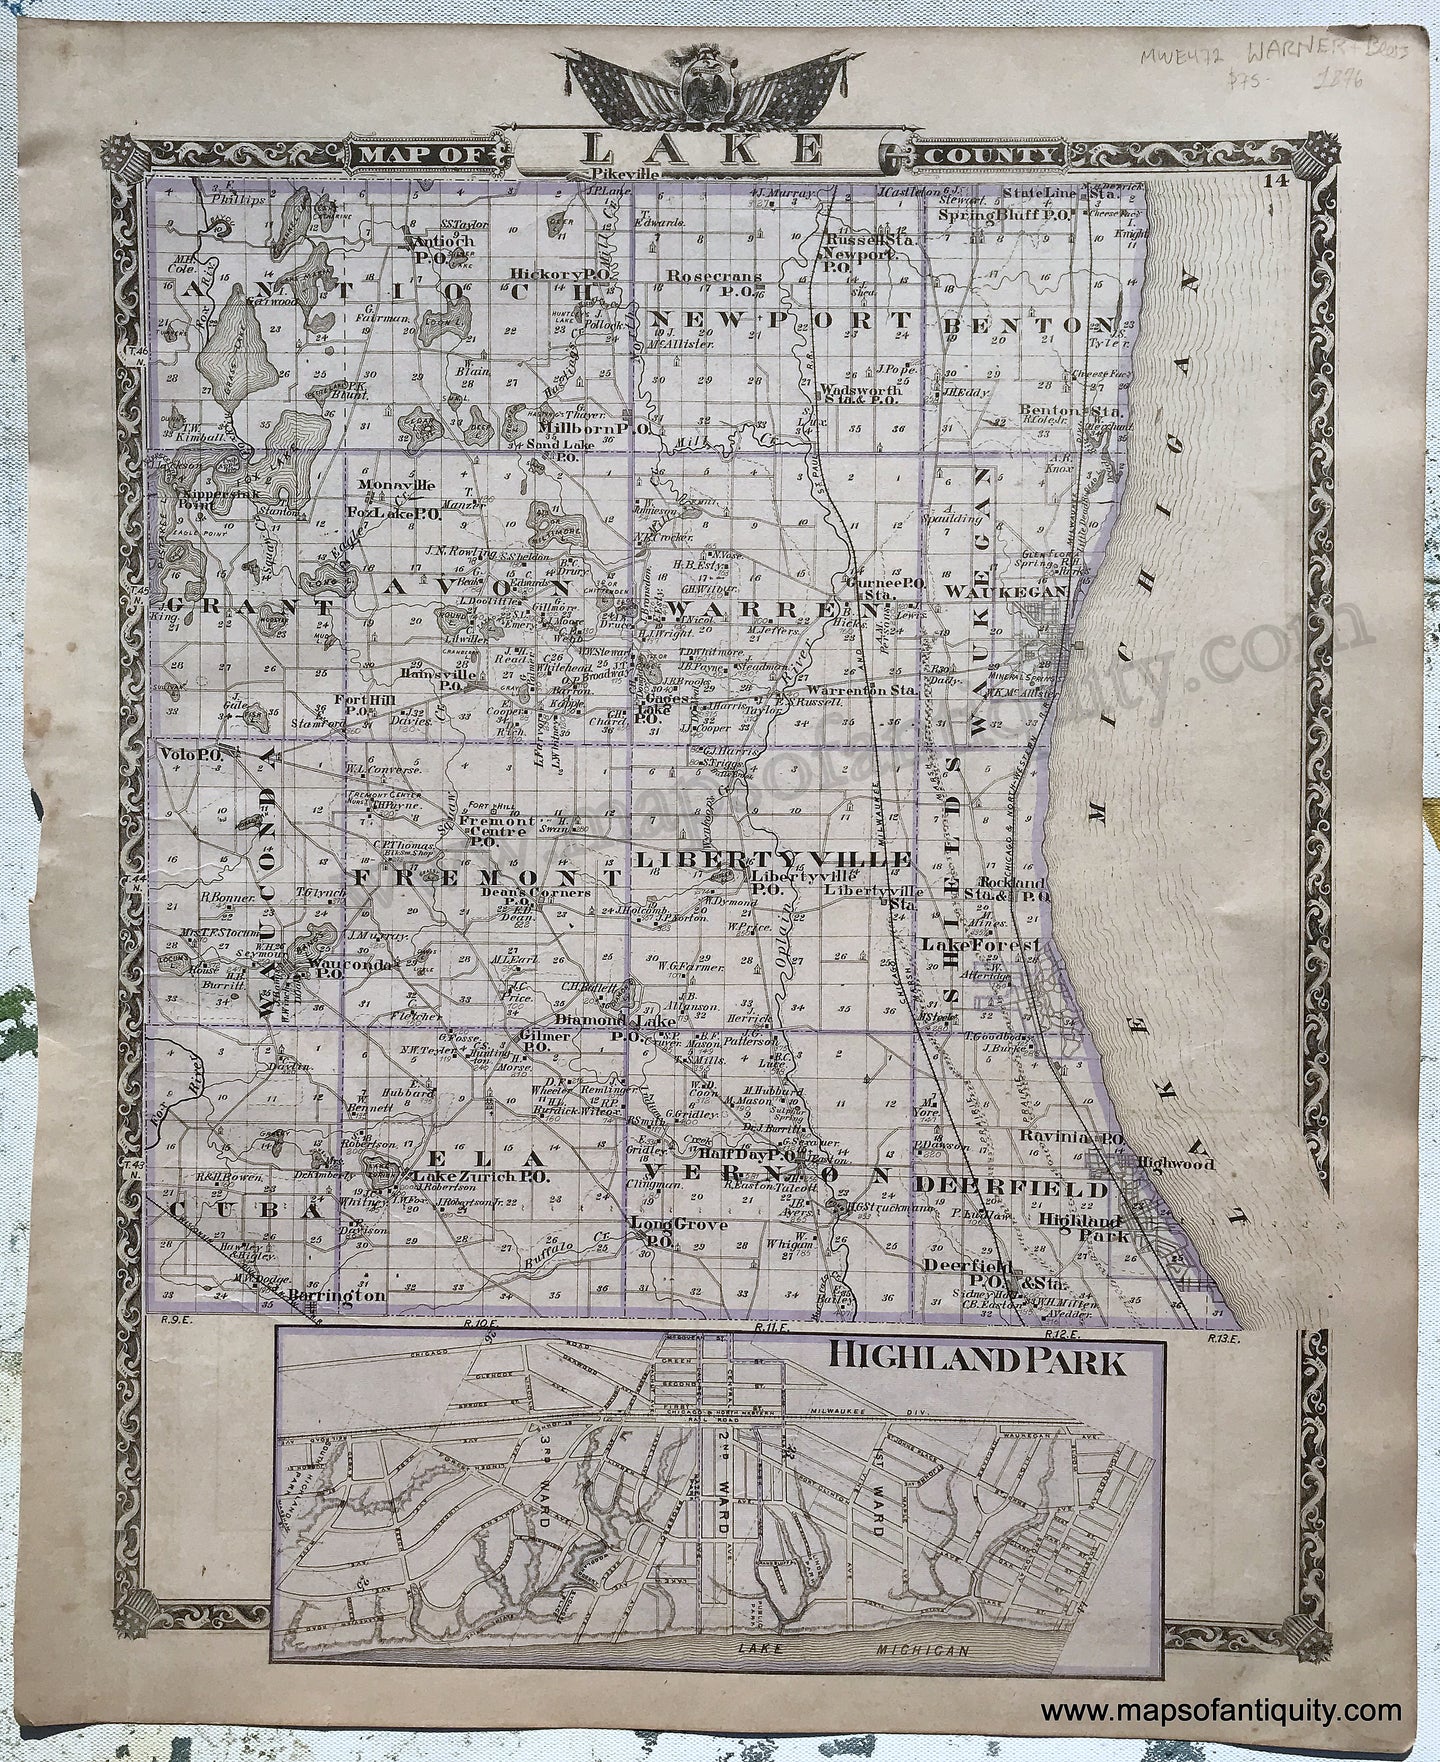 Antique-Hand-Colored-Map-Lake-County;-verso:-Boone-and-McHenry-Counties-Illinois-1876-Warner-&-Beers-/-Union-Atlas-Co.-Midwest-1800s-19th-century-Maps-of-Antiquity